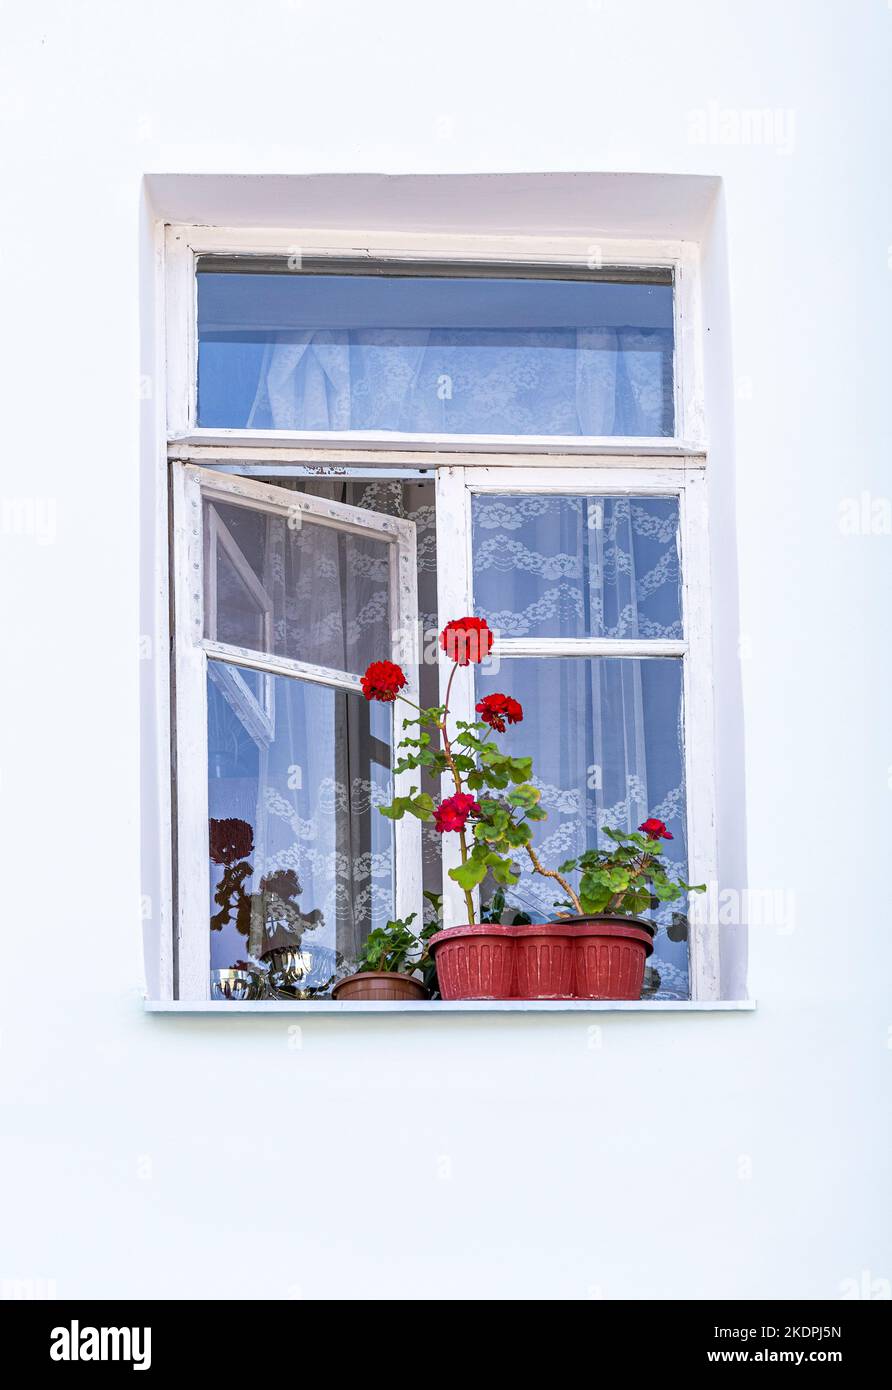 Decorative geranium flowers in a pot on the windowsill of the appartment house Stock Photo